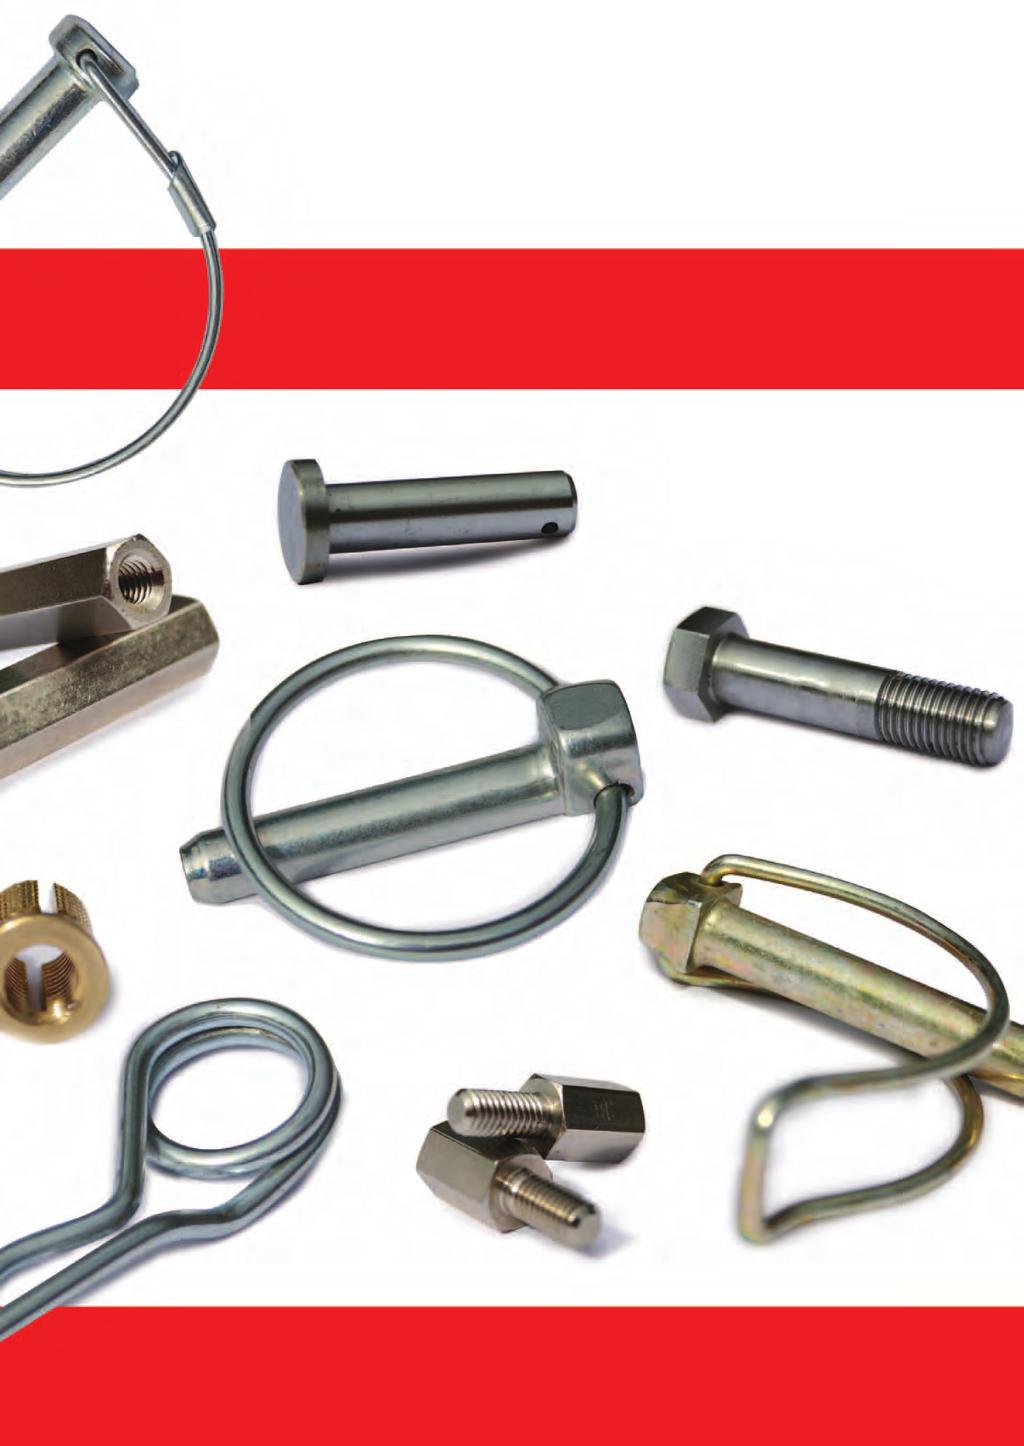 A leading supplier & manufacturer of precision engineered components T: +44 (0)